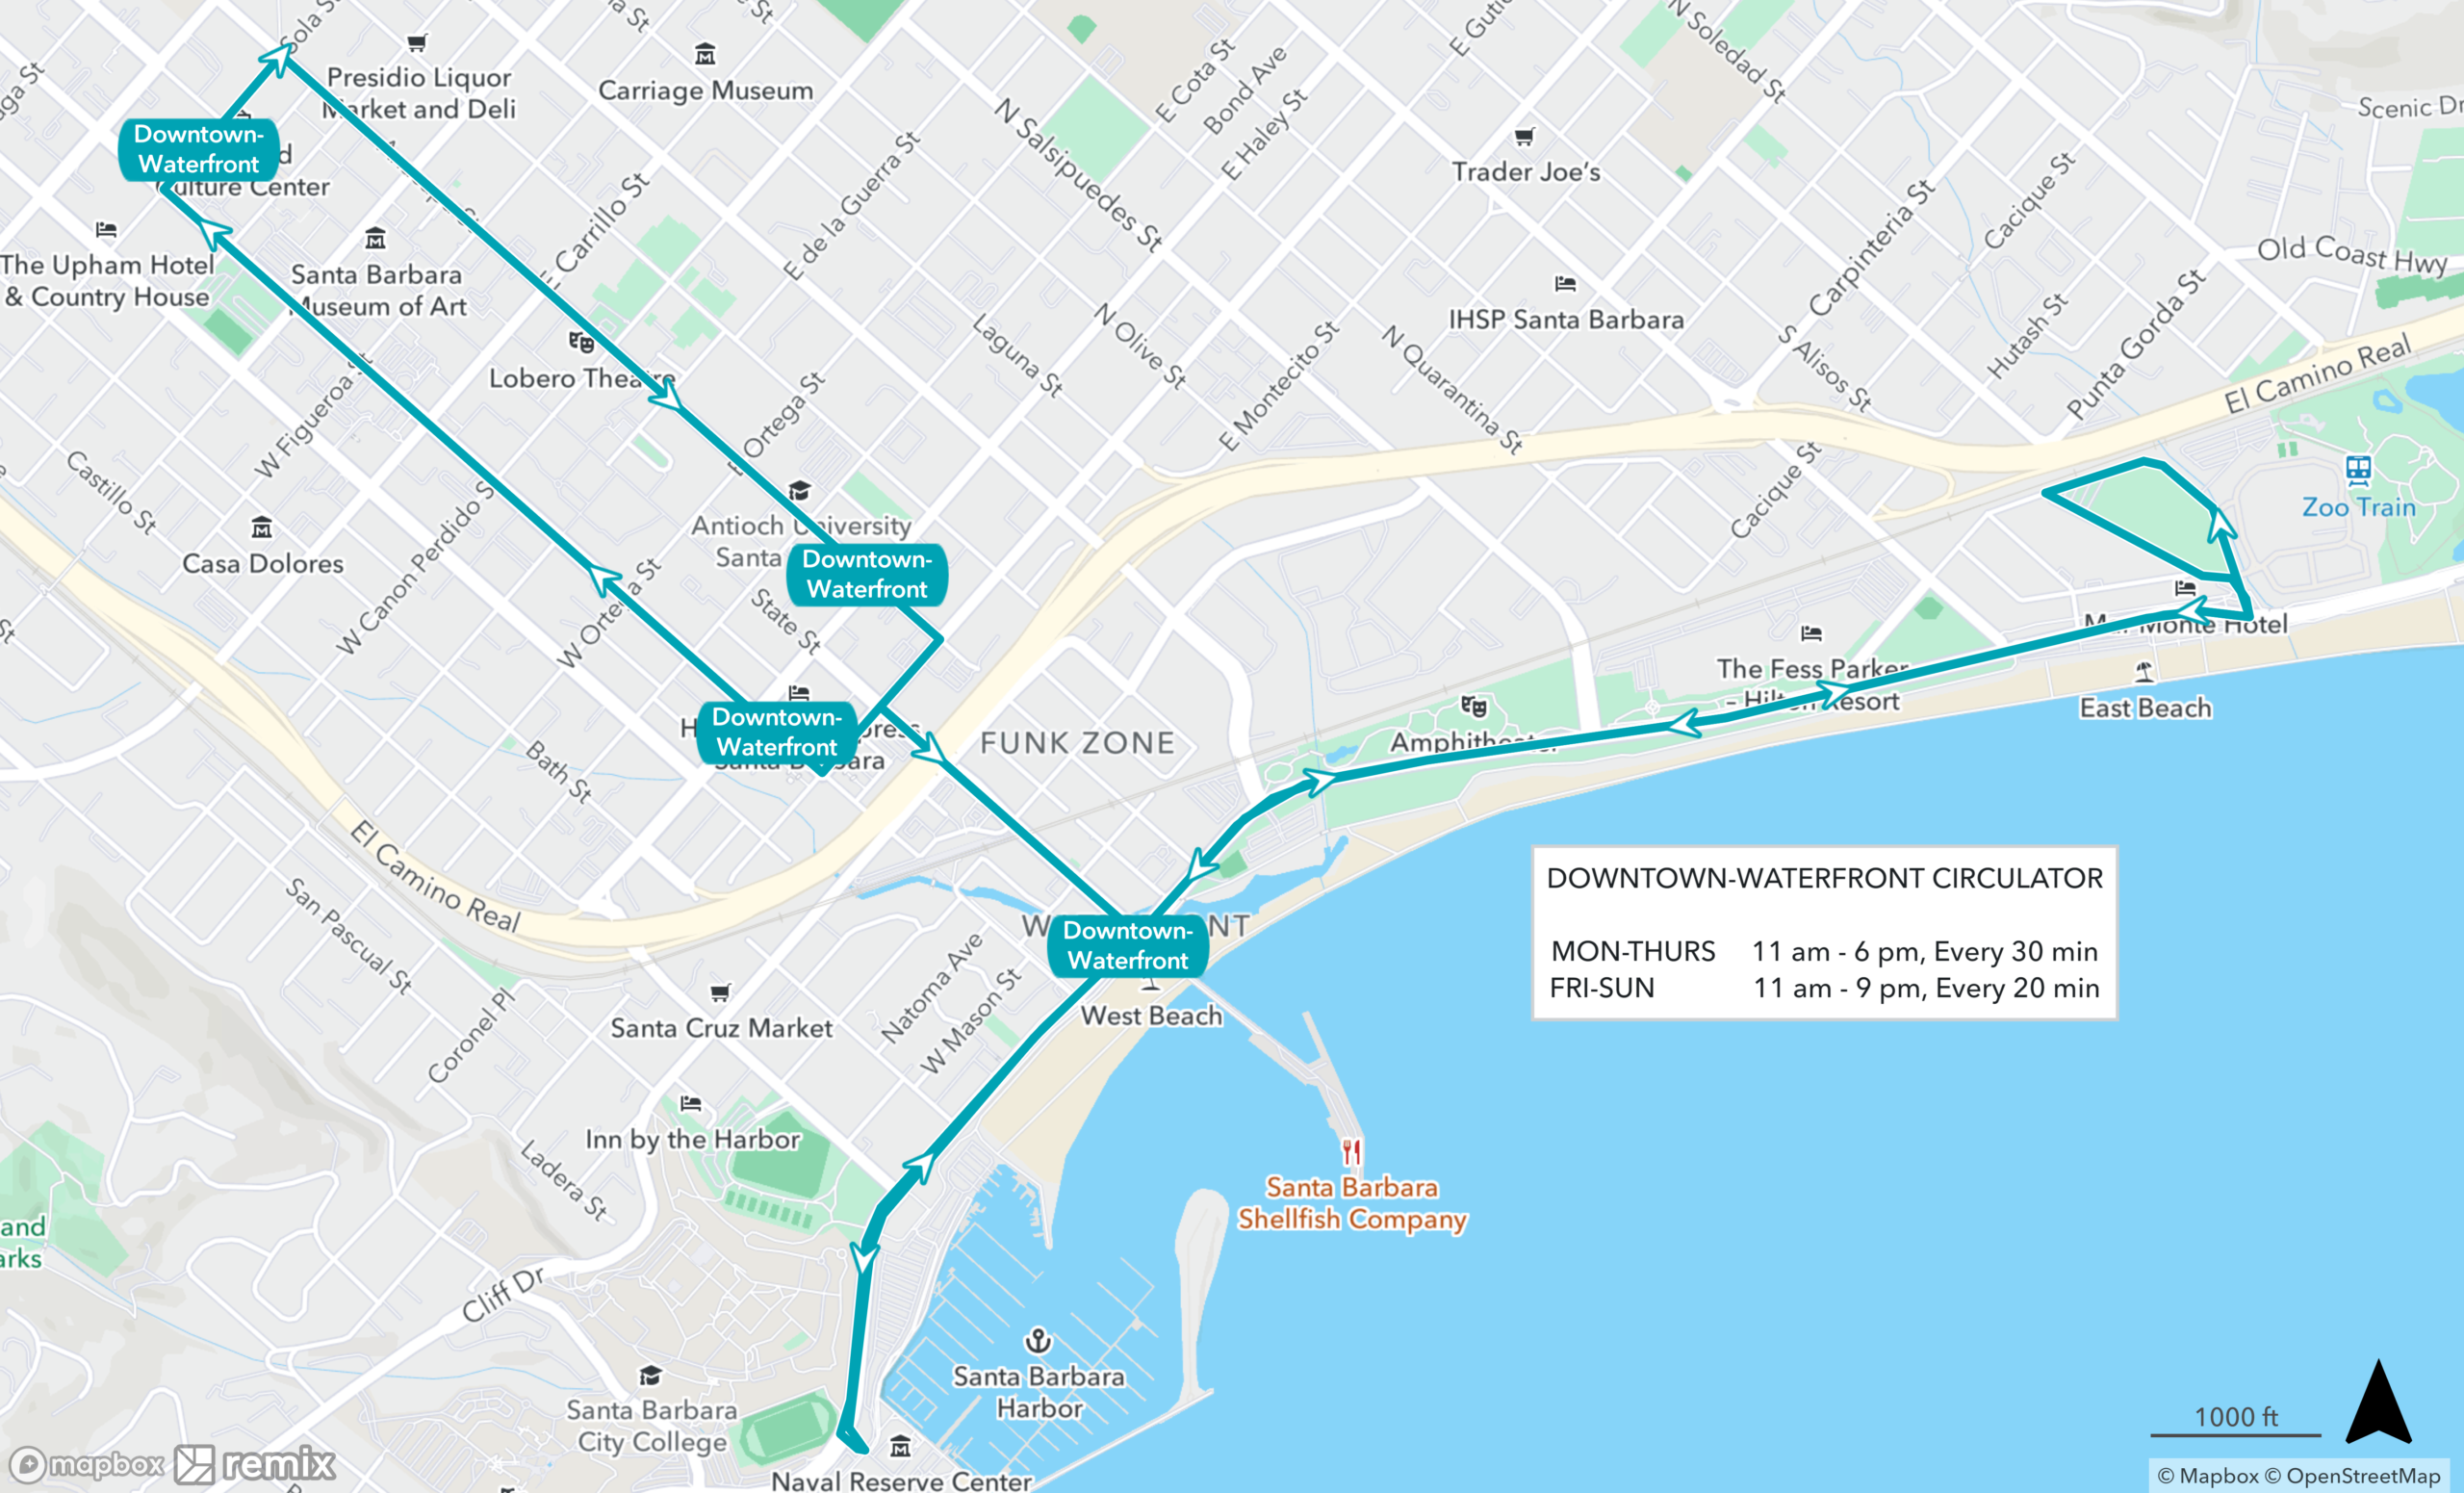 Map of the Downtown and Waterfront of Santa Barbara with a circulator route that goes up Chapala, right on Sola, right on Anacapa, right on Gutierrez, left on State, right on Cabrillo, to the harbor, then back down Cabrillo to the Zoo, then up Cabrillo and right on State Street, left on Gutierrez and right on Chapala.